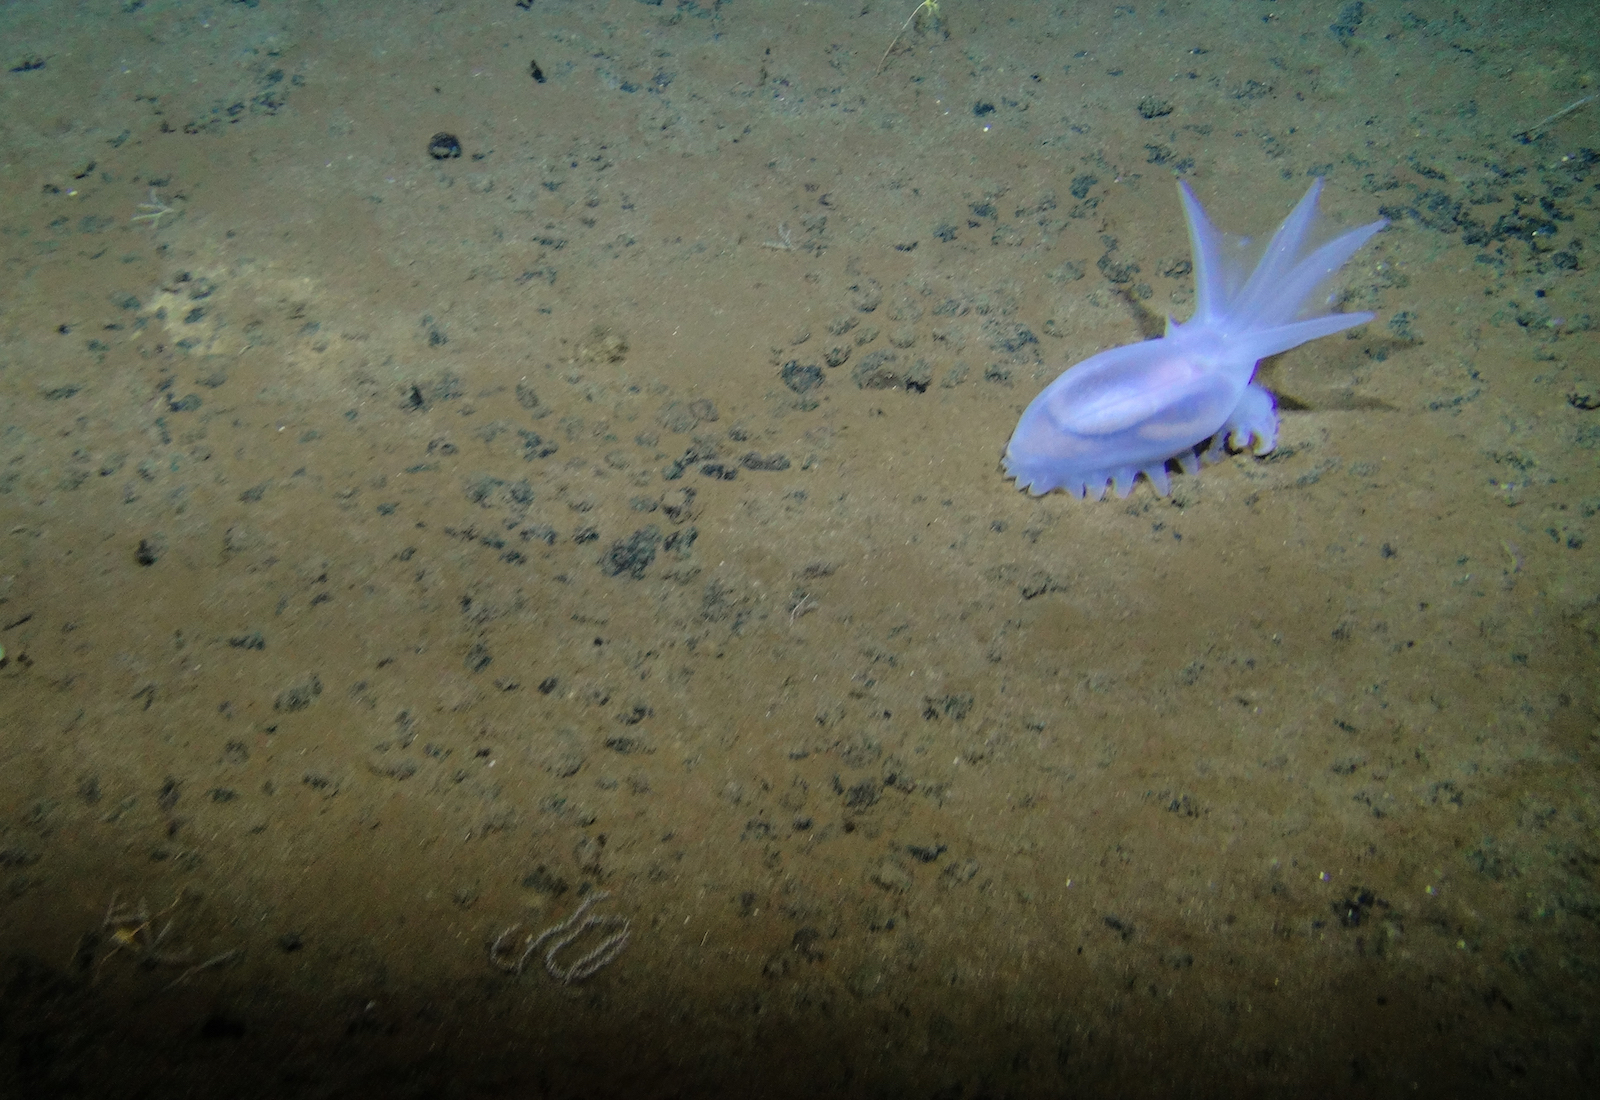 sandy sea floor with rocks and a pale blue sea cucumber with an oval body and a fanlike tail